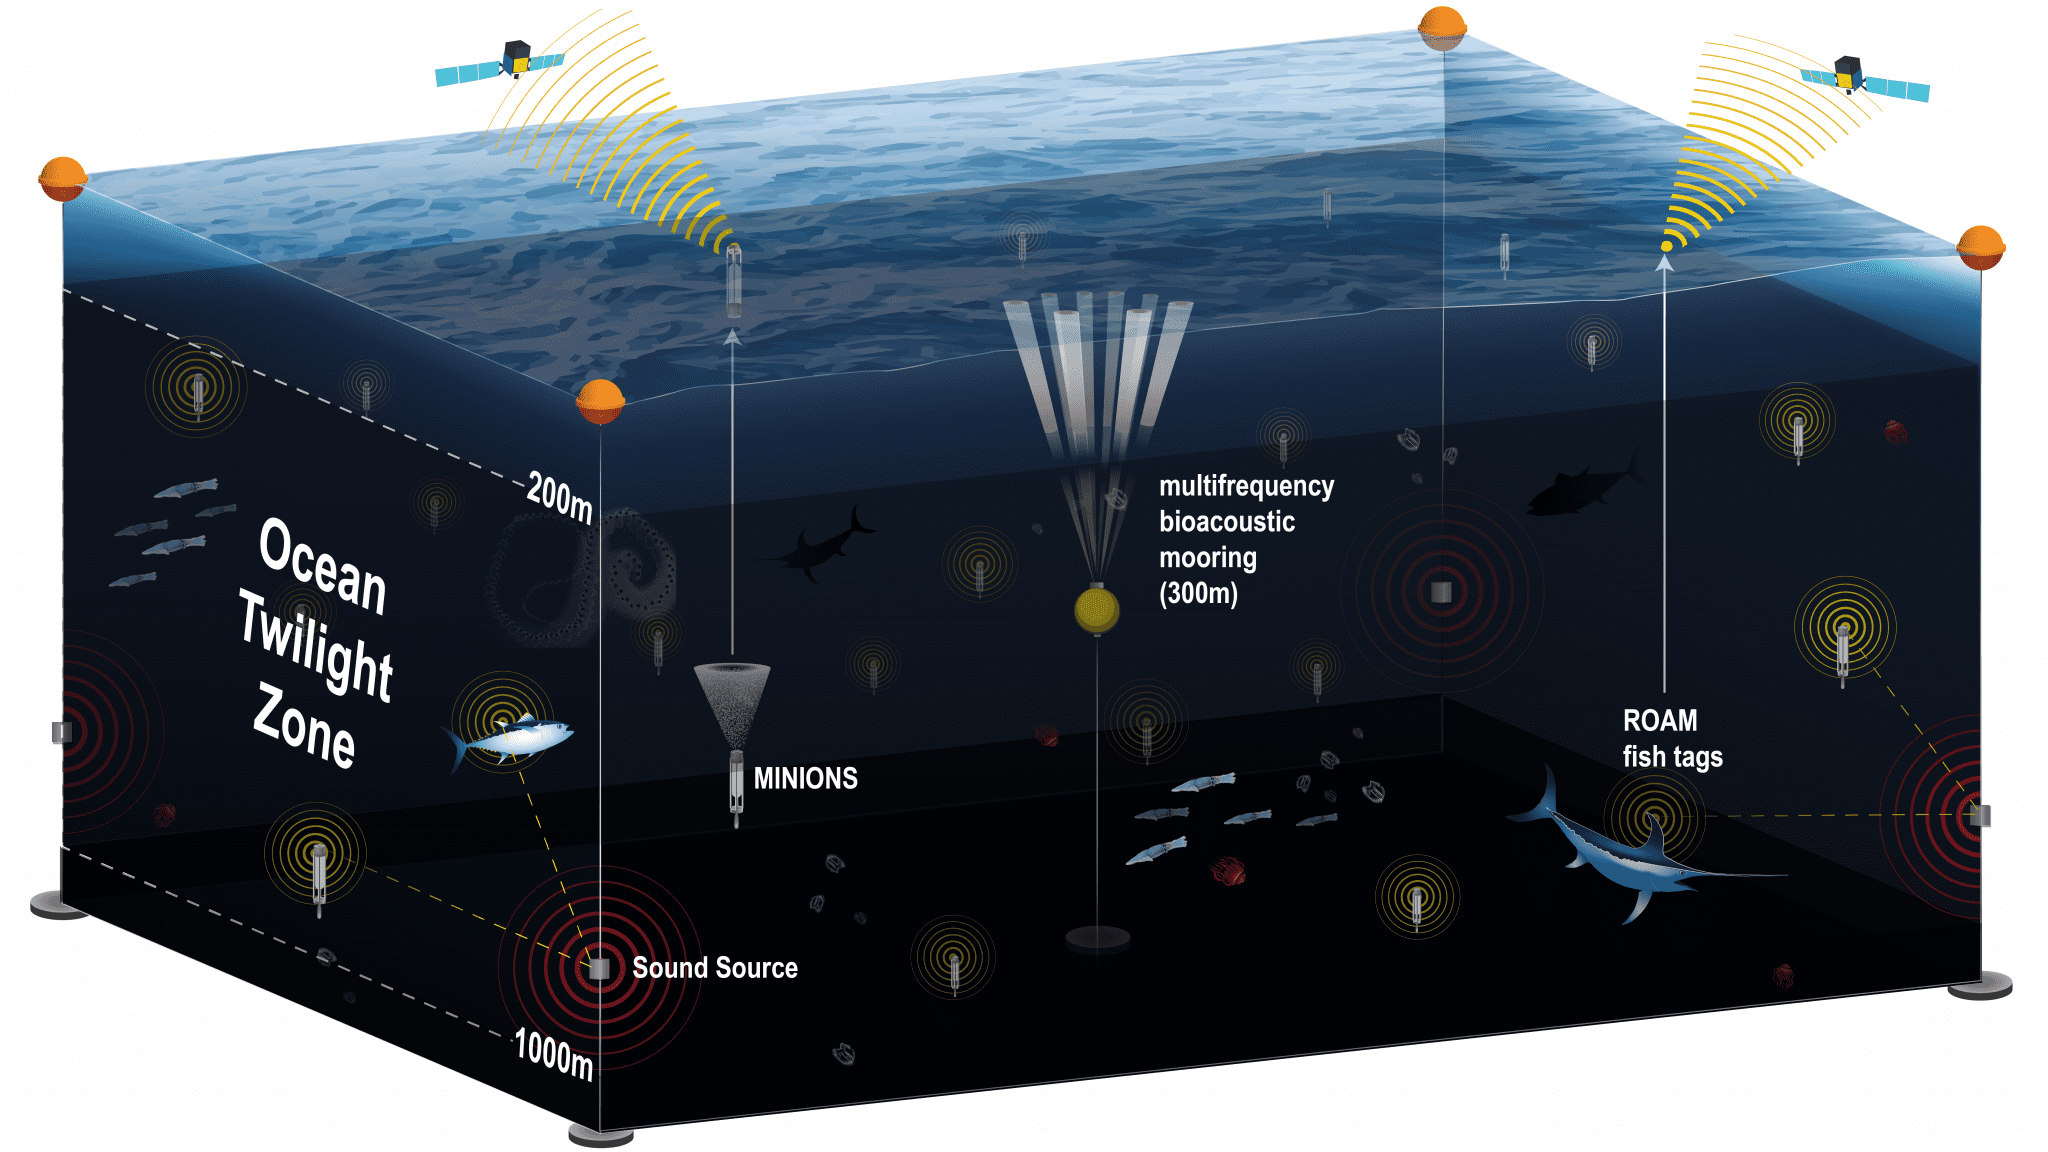 New Observation Network Will Provide Unprecedented Long Term View Of Life In The Ocean Twilight 3310